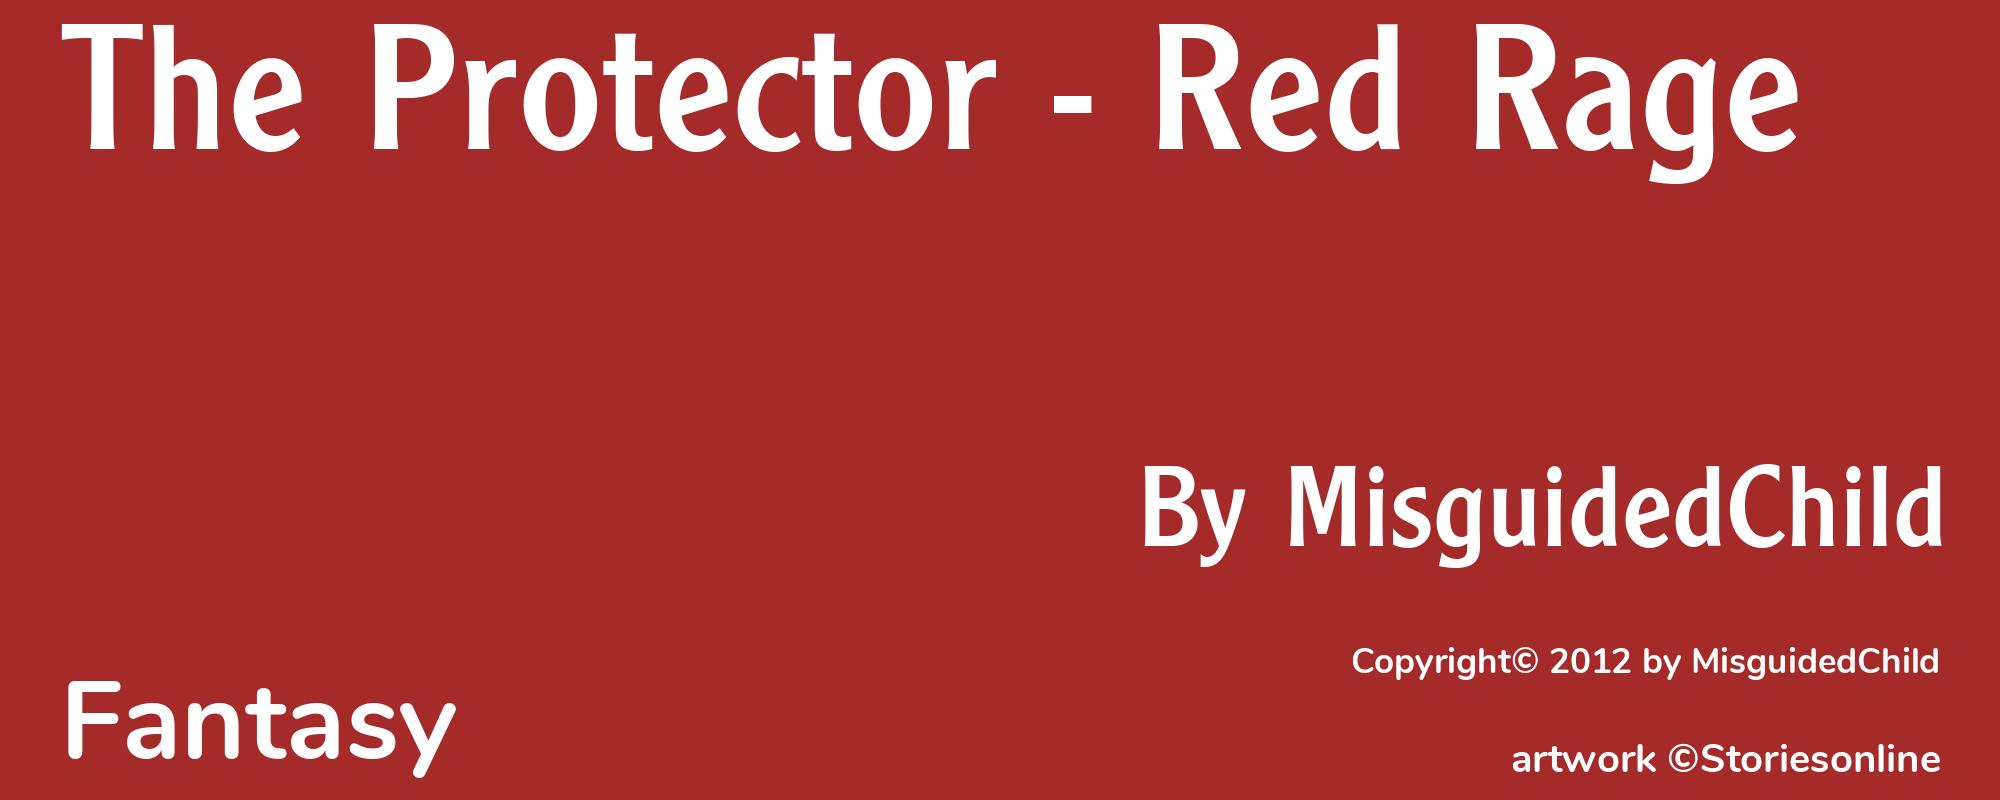 The Protector - Red Rage - Cover